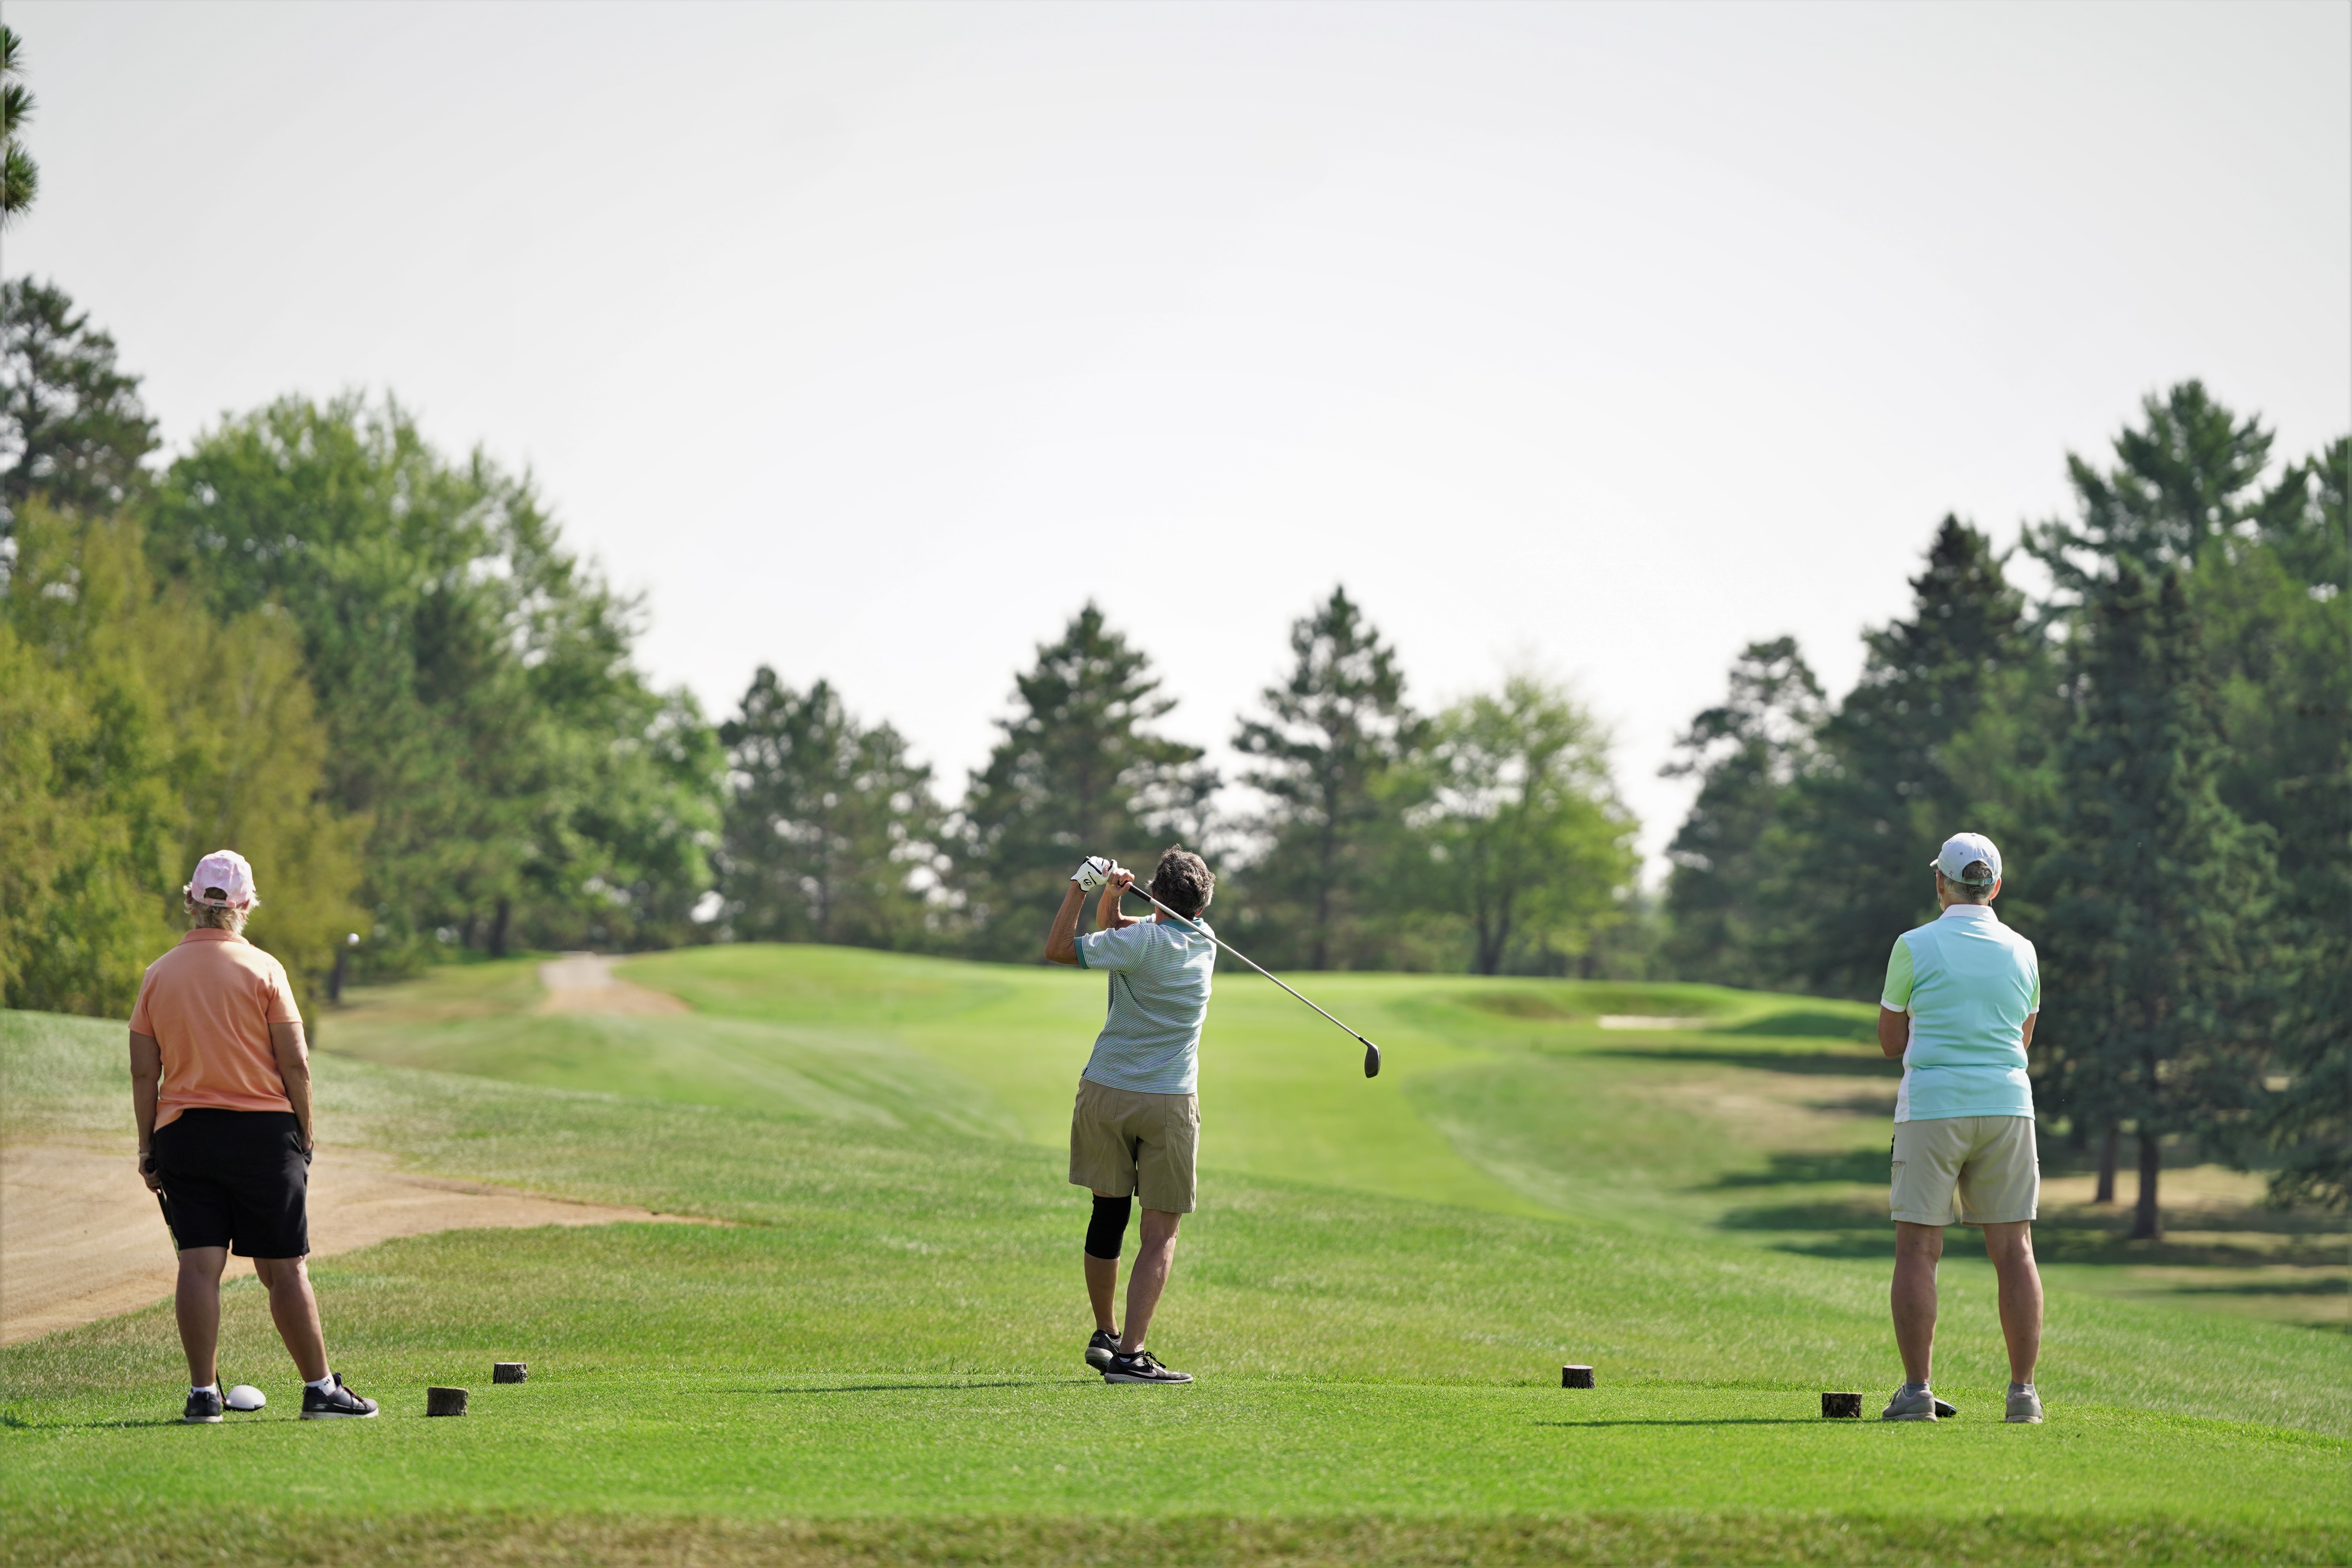 Golfers tee off on hole No. 1 during the Howe-Welle Women's Athletics Golf Tournament on Friday, Aug. 25, 2023, at the Bemidji Town and Country Club. (Micah Friez / Bemidji State)